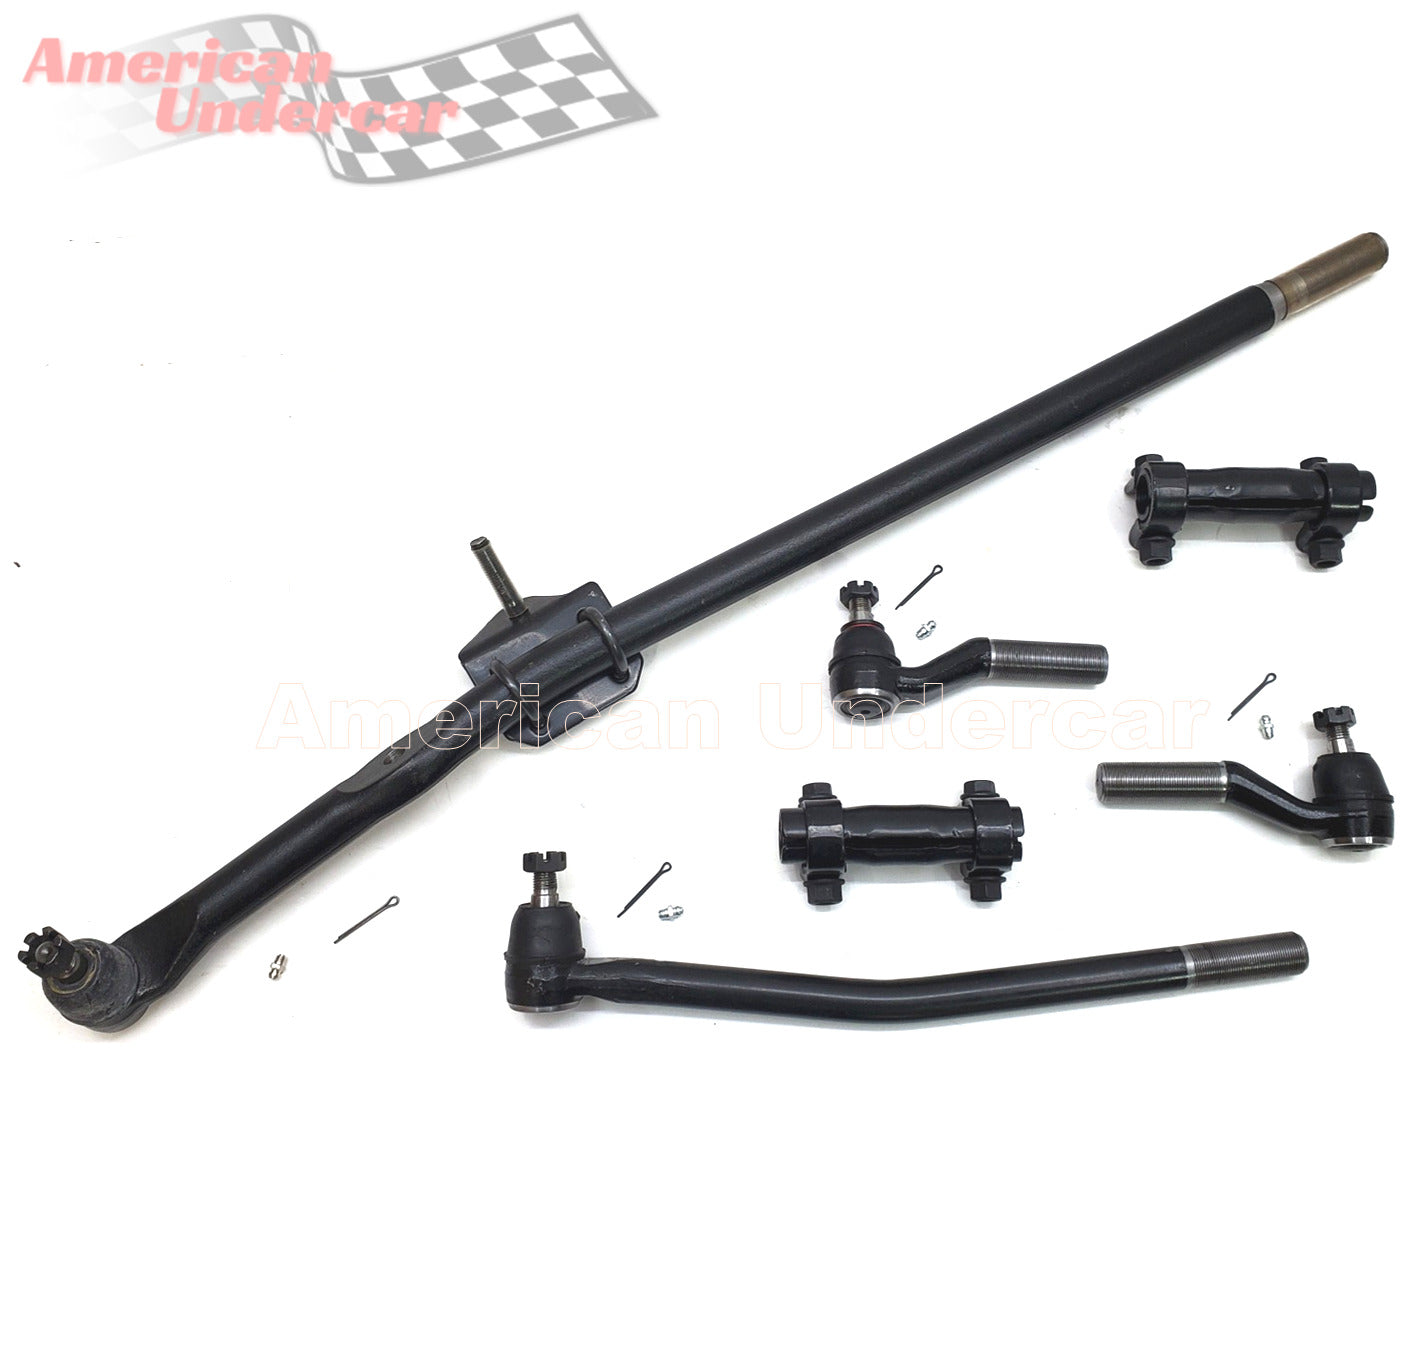 HD Drag Link Tie Rod Sleeve Steering Kit for 1992-2006 Ford E250 DRW